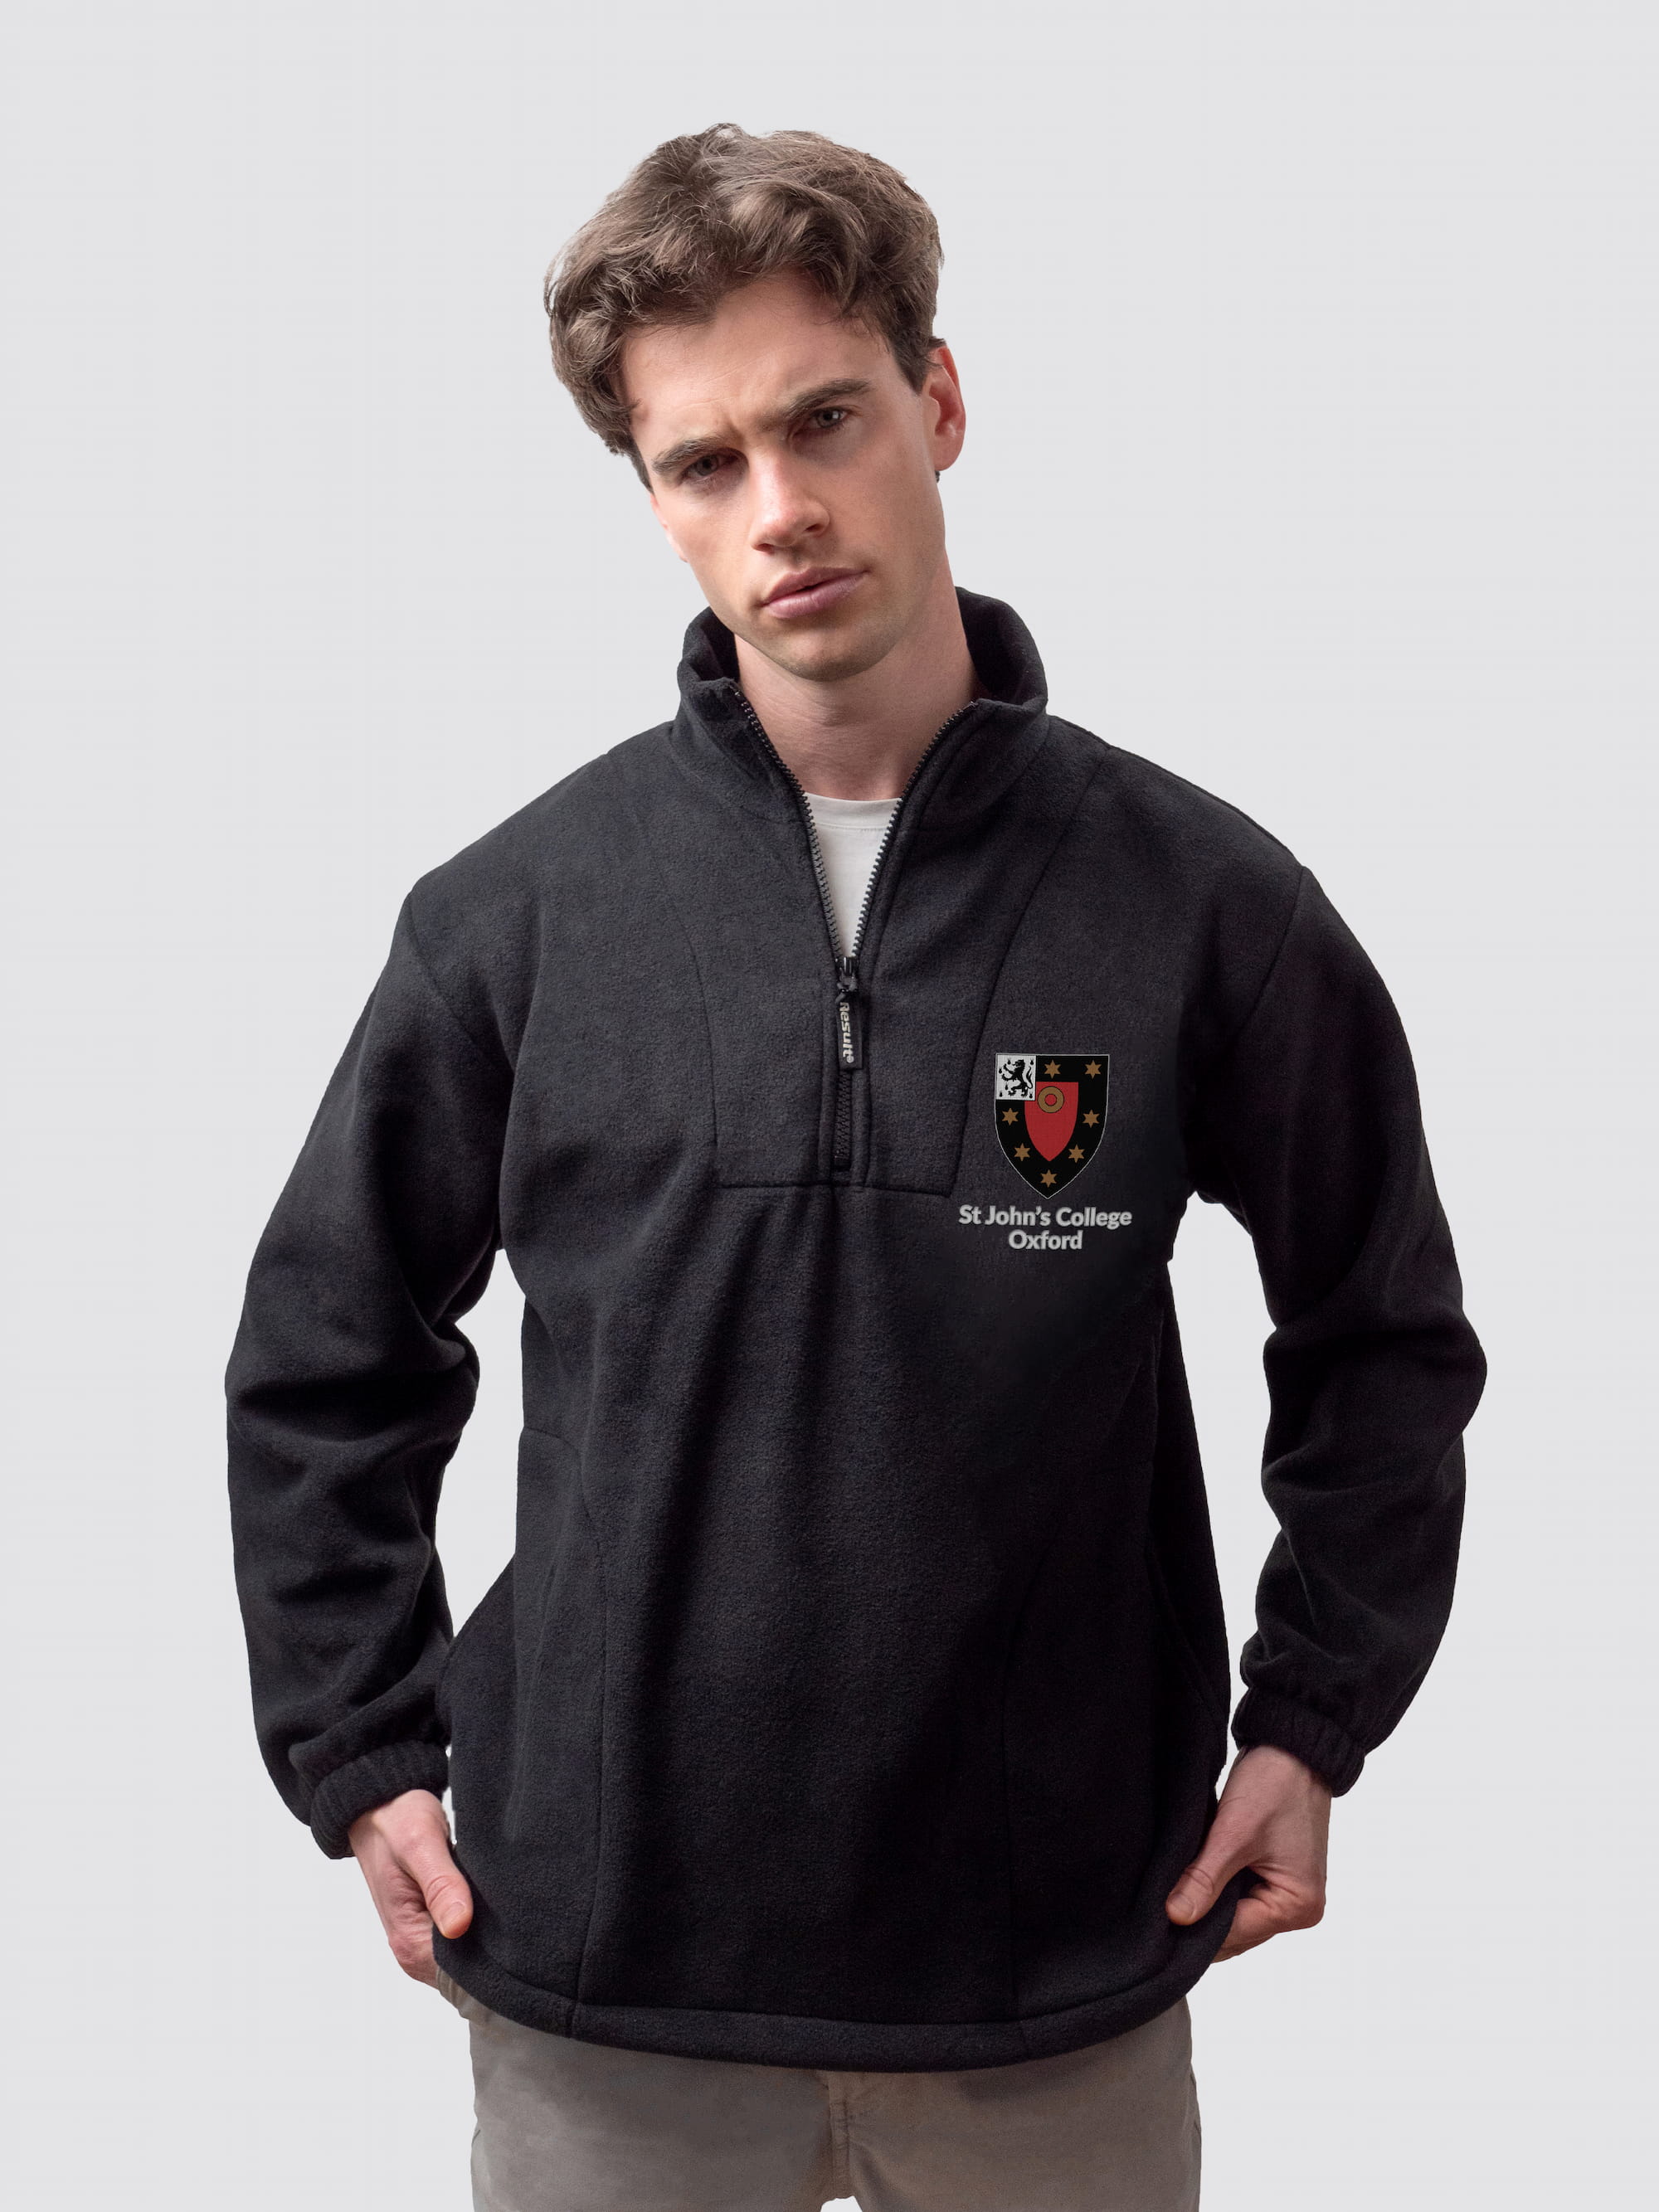 Oxford university fleece, with custom embroidered initials and St John's crest